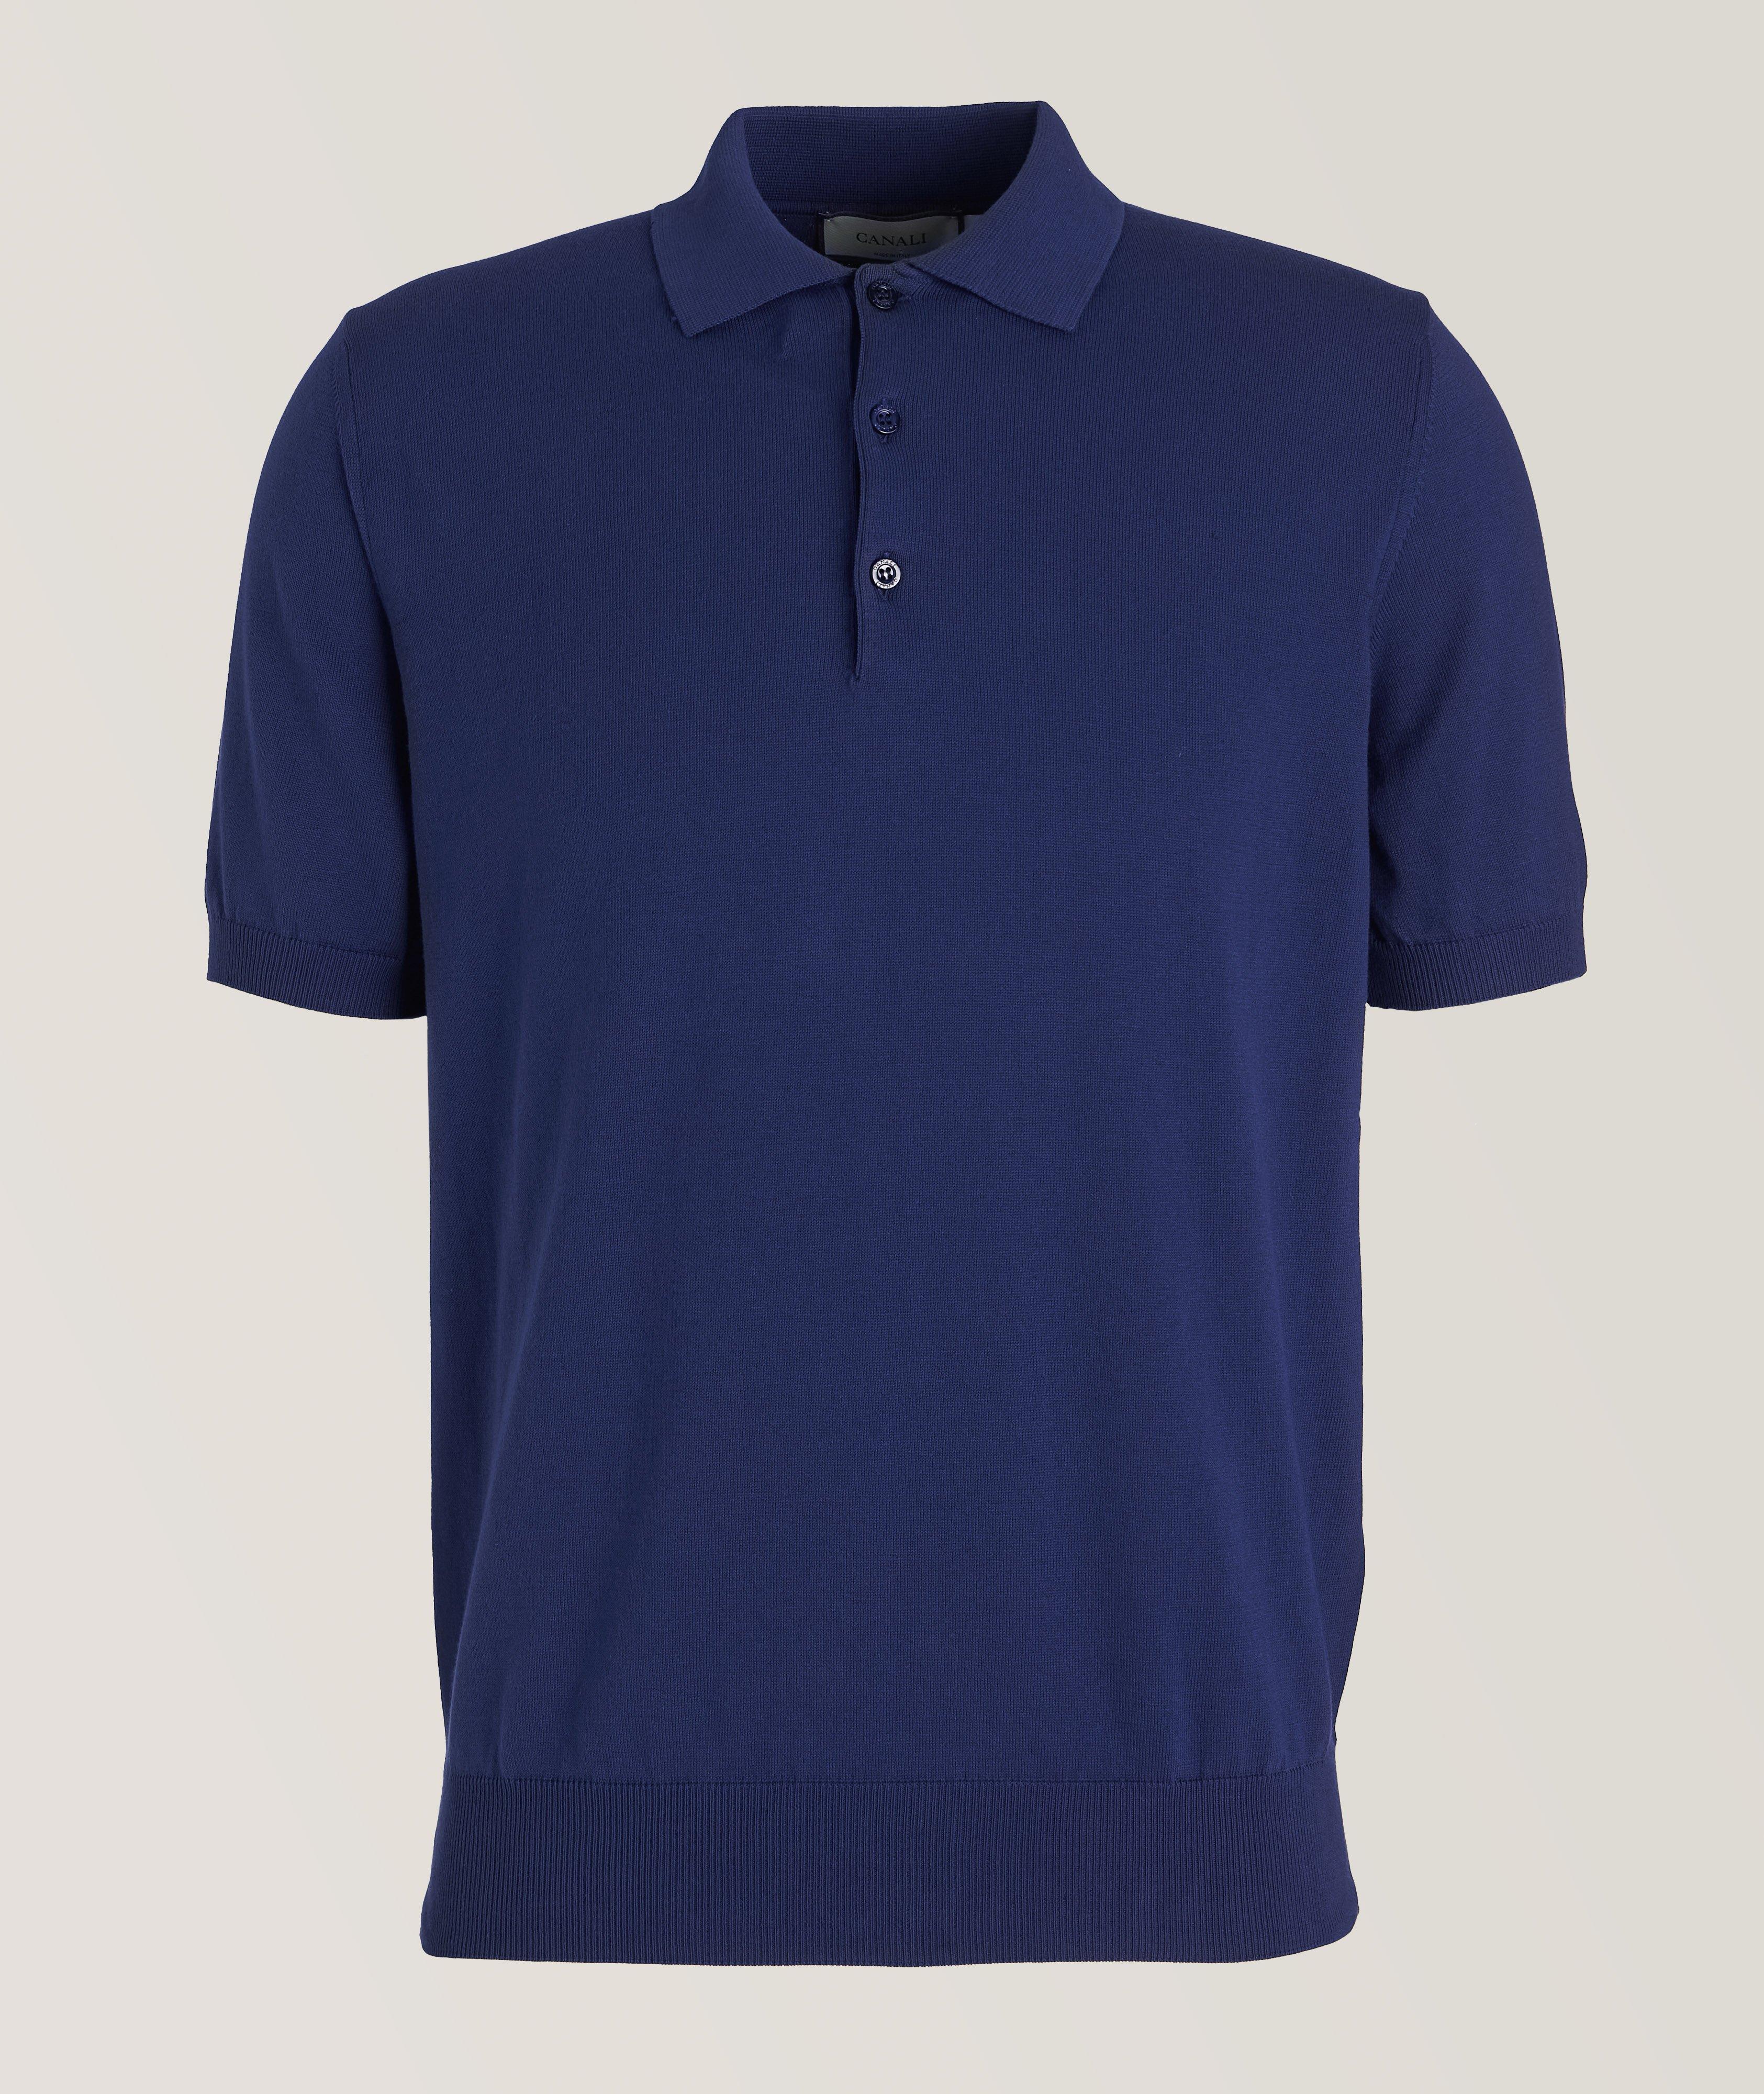 Canali Solid Cotton Knit Polo | Polos | Harry Rosen